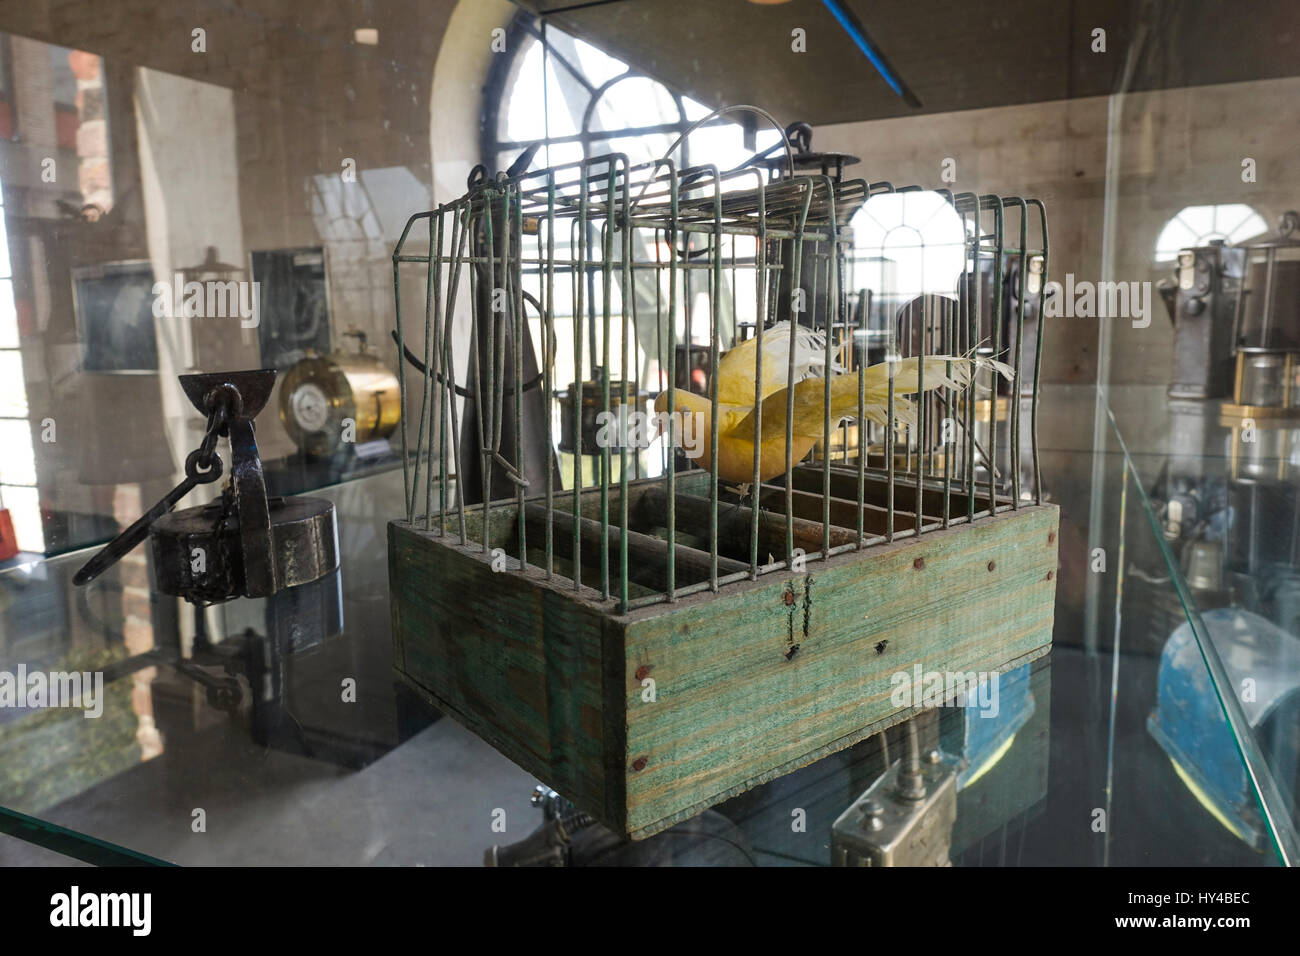 Presentation of Bird, canary in cage as being used in coal mines ...